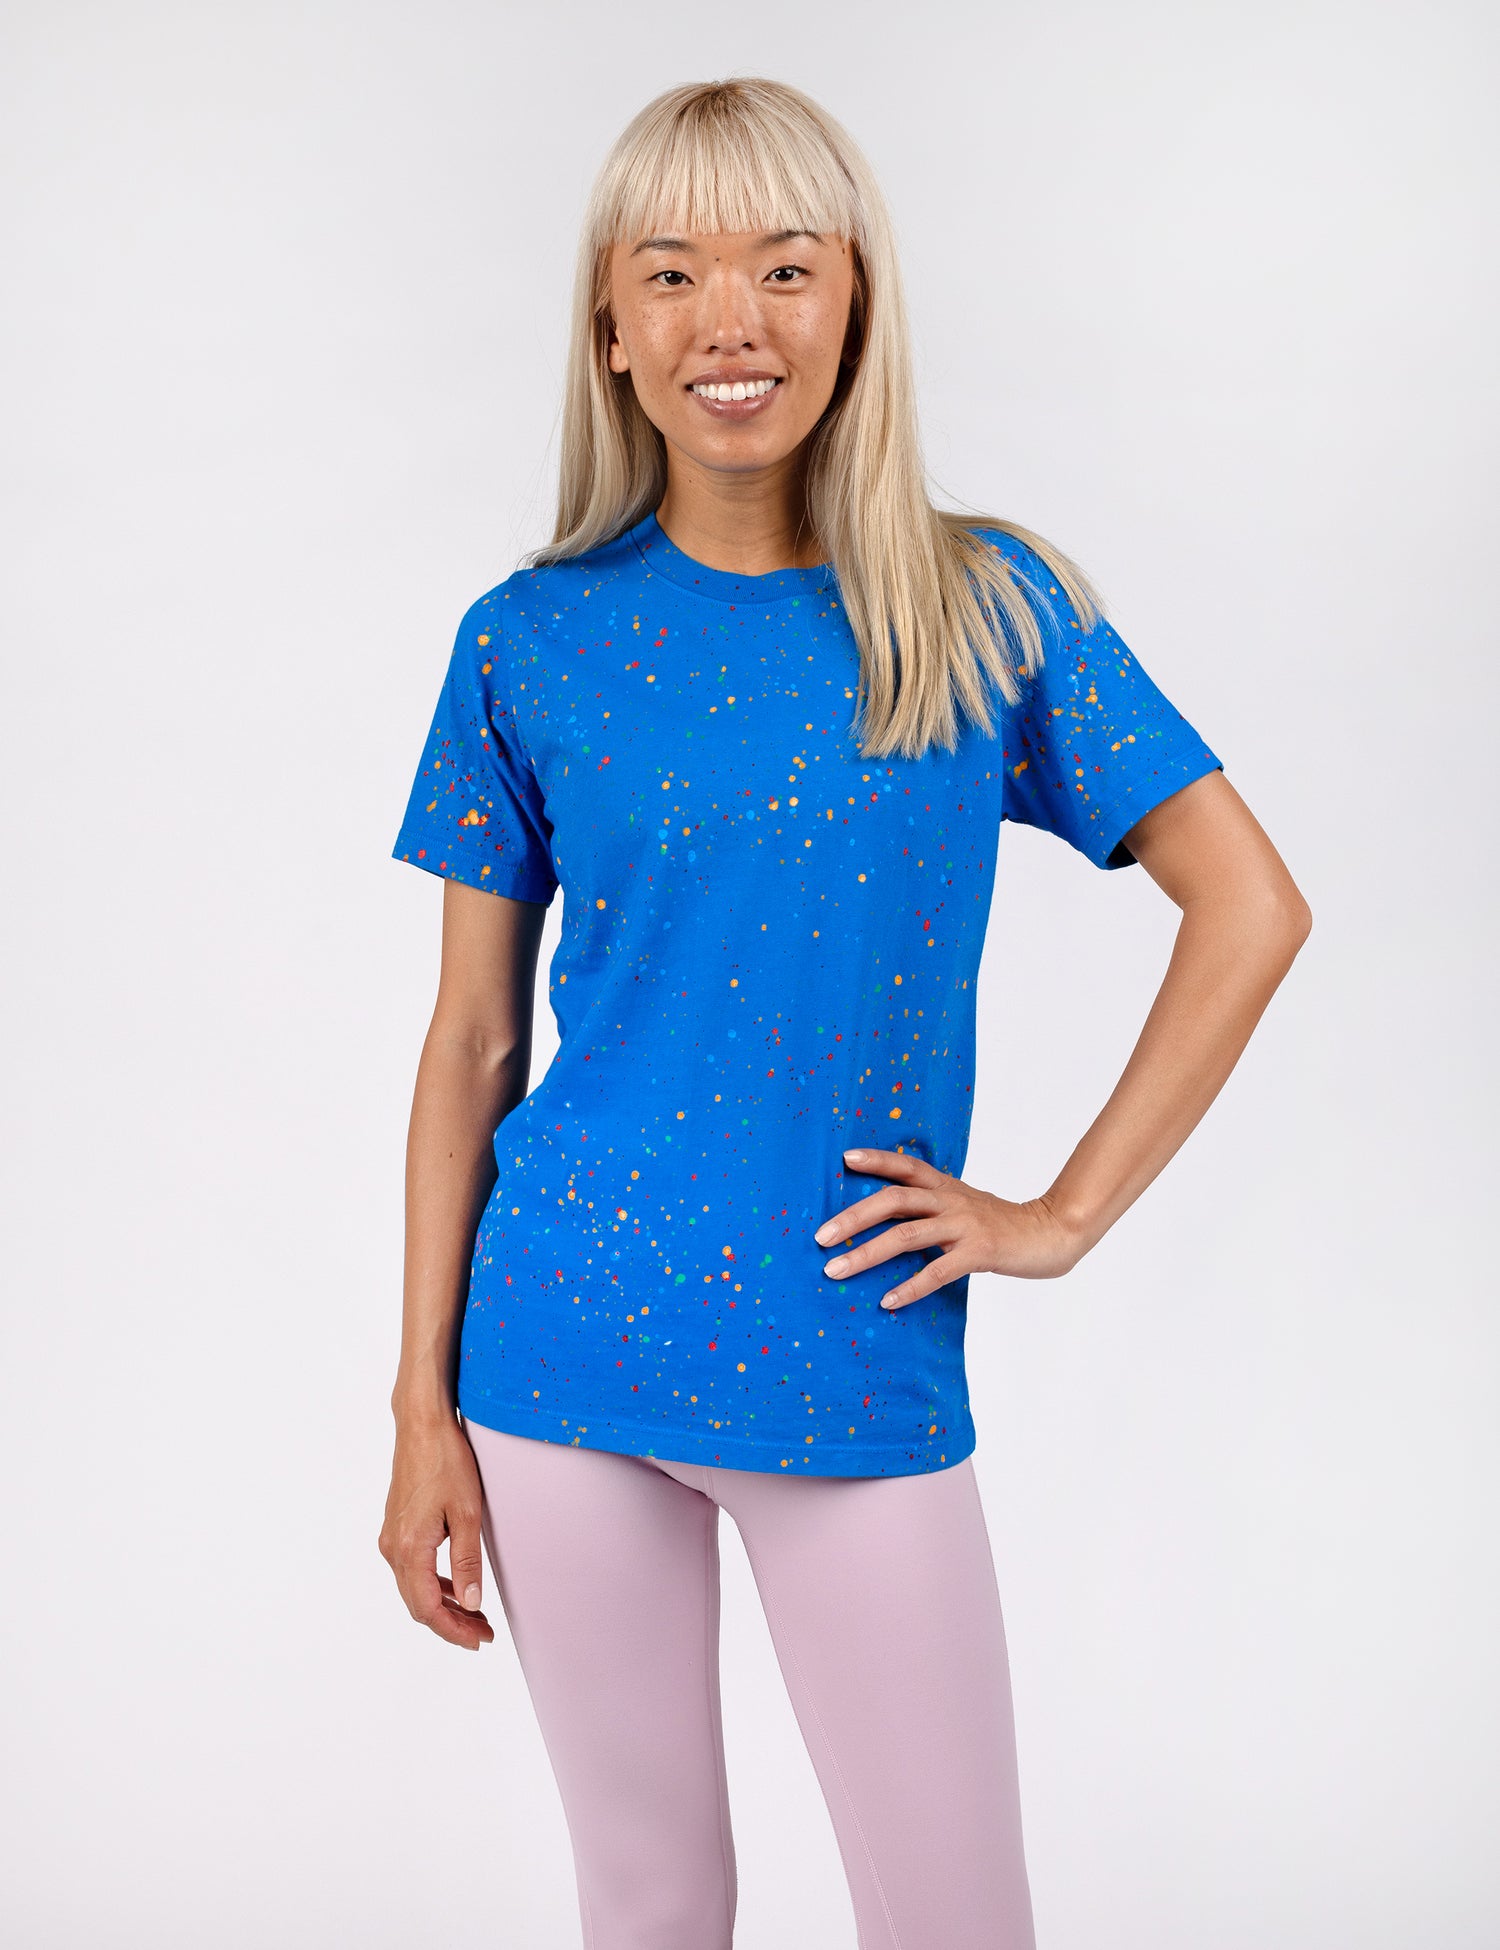 woman wearing a dark blue shirt with confetti paint all over